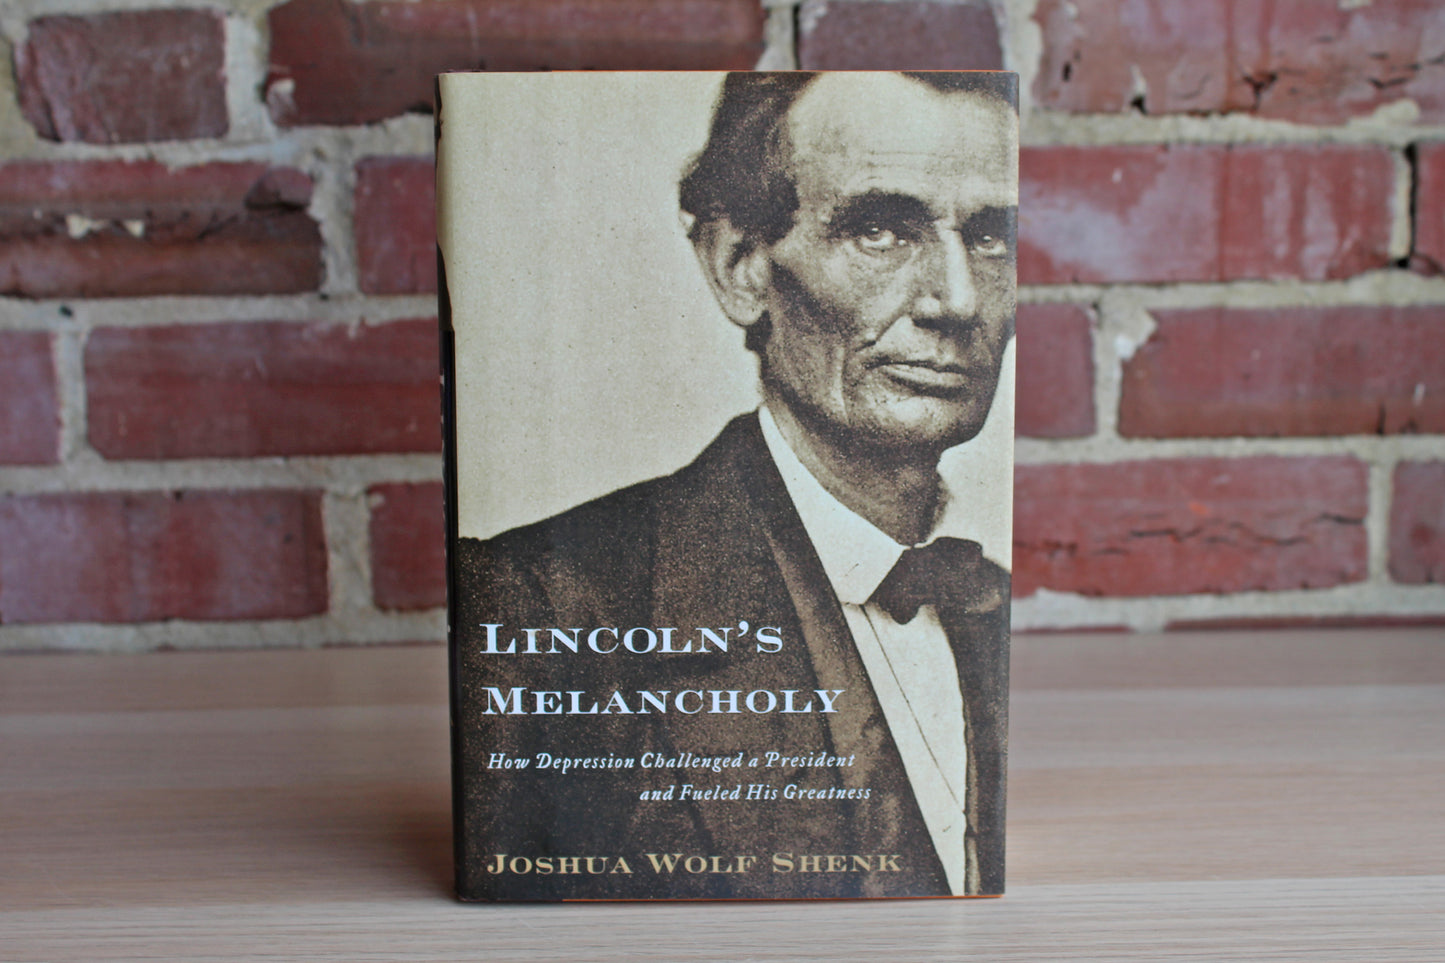 Lincoln's Melancholy:  How Depression Challenged a President and Fueled His Greatness by Joshua Wolf Shenk